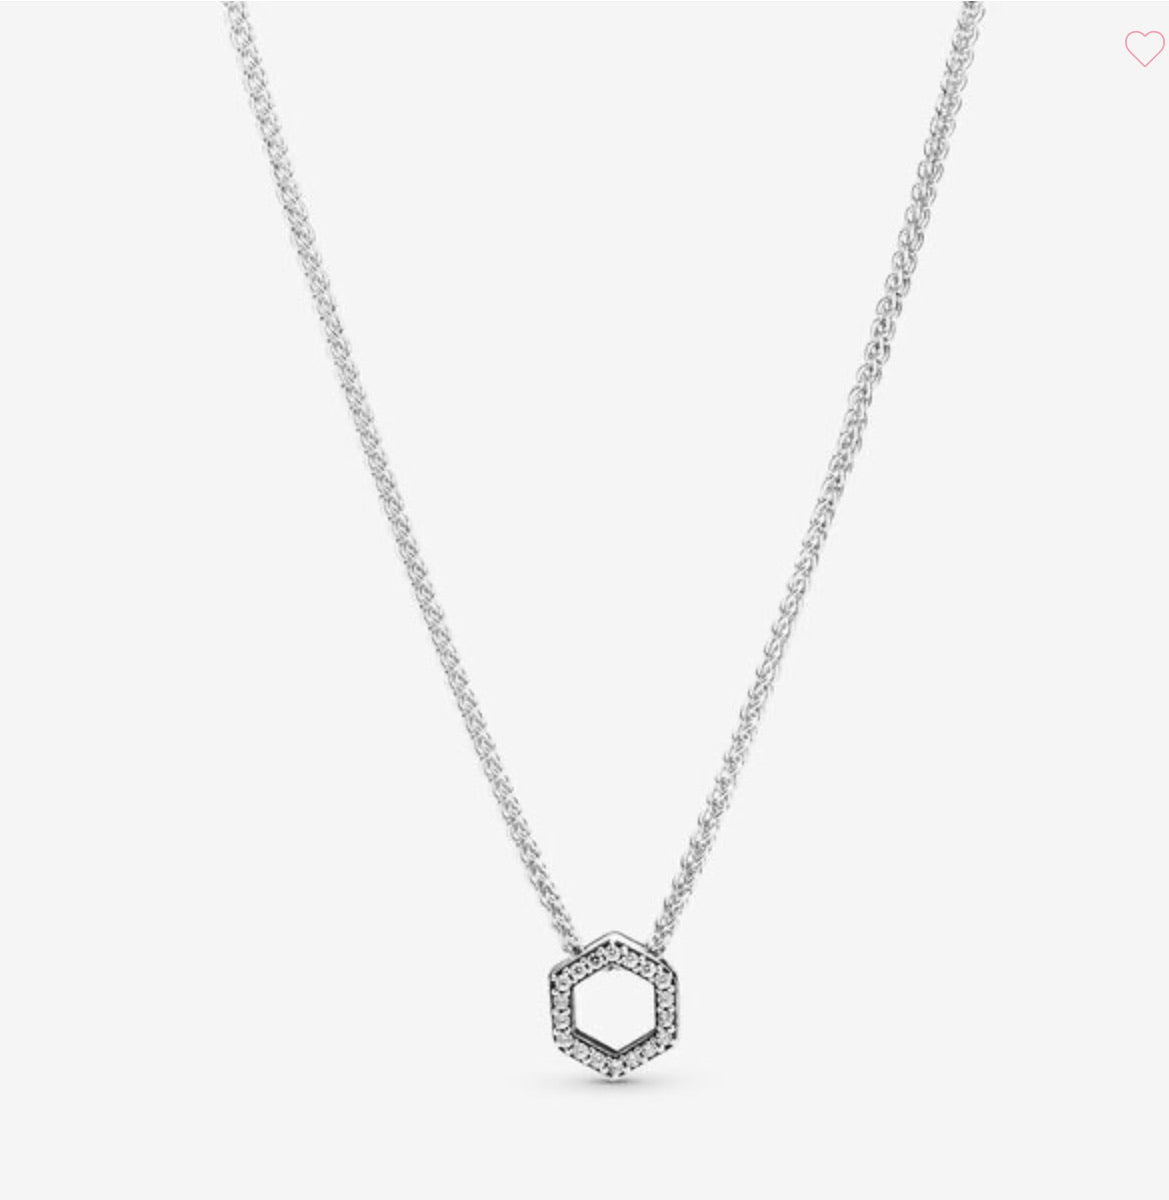 Sparkling Honeycomb Hexagon Collier Necklace-JewelrYowns